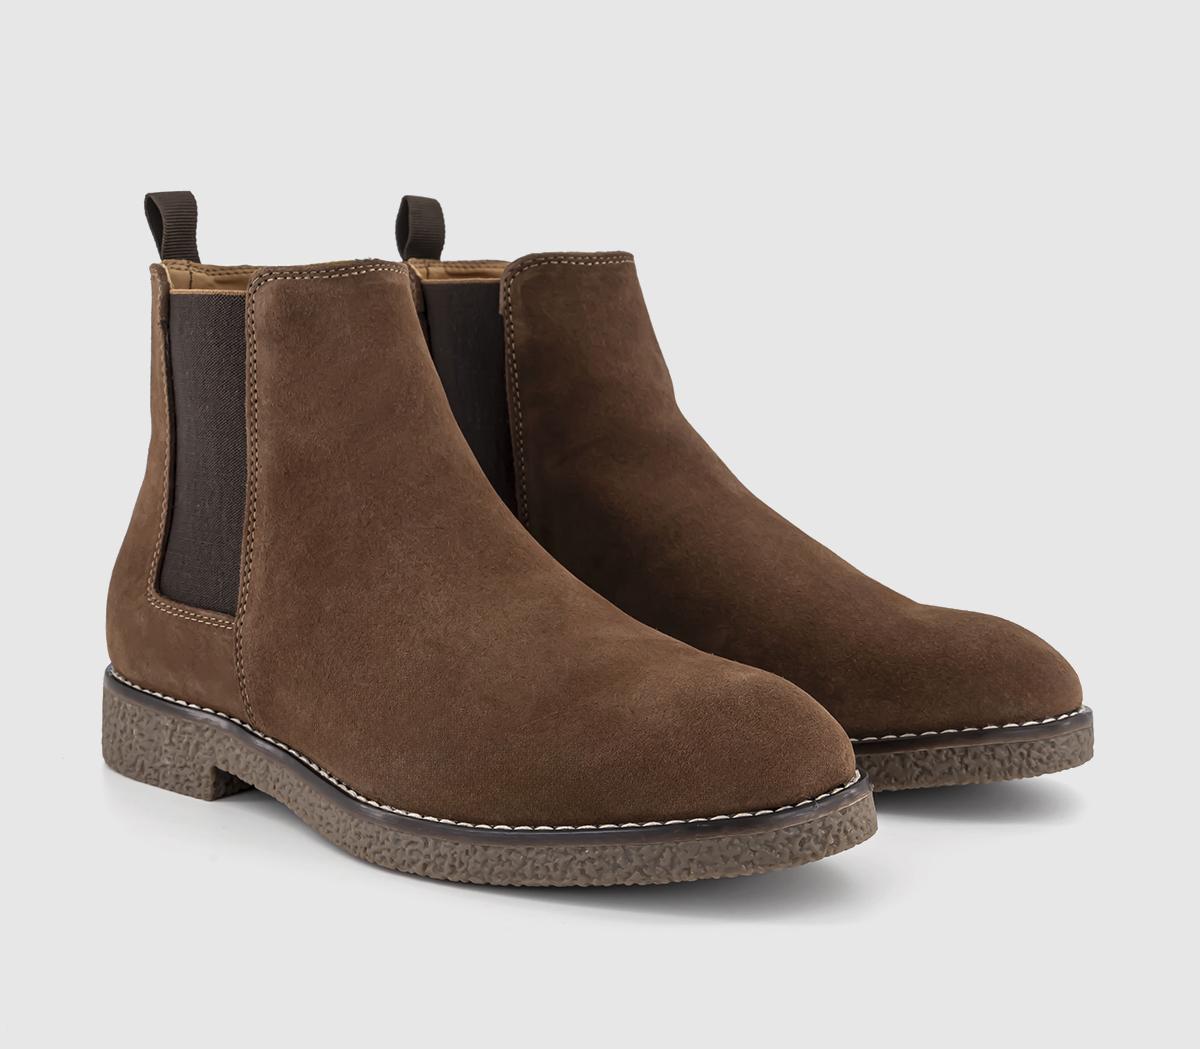 OFFICE Mens Bachelor Crepe Look Chelsea Boots Brown Suede, 9